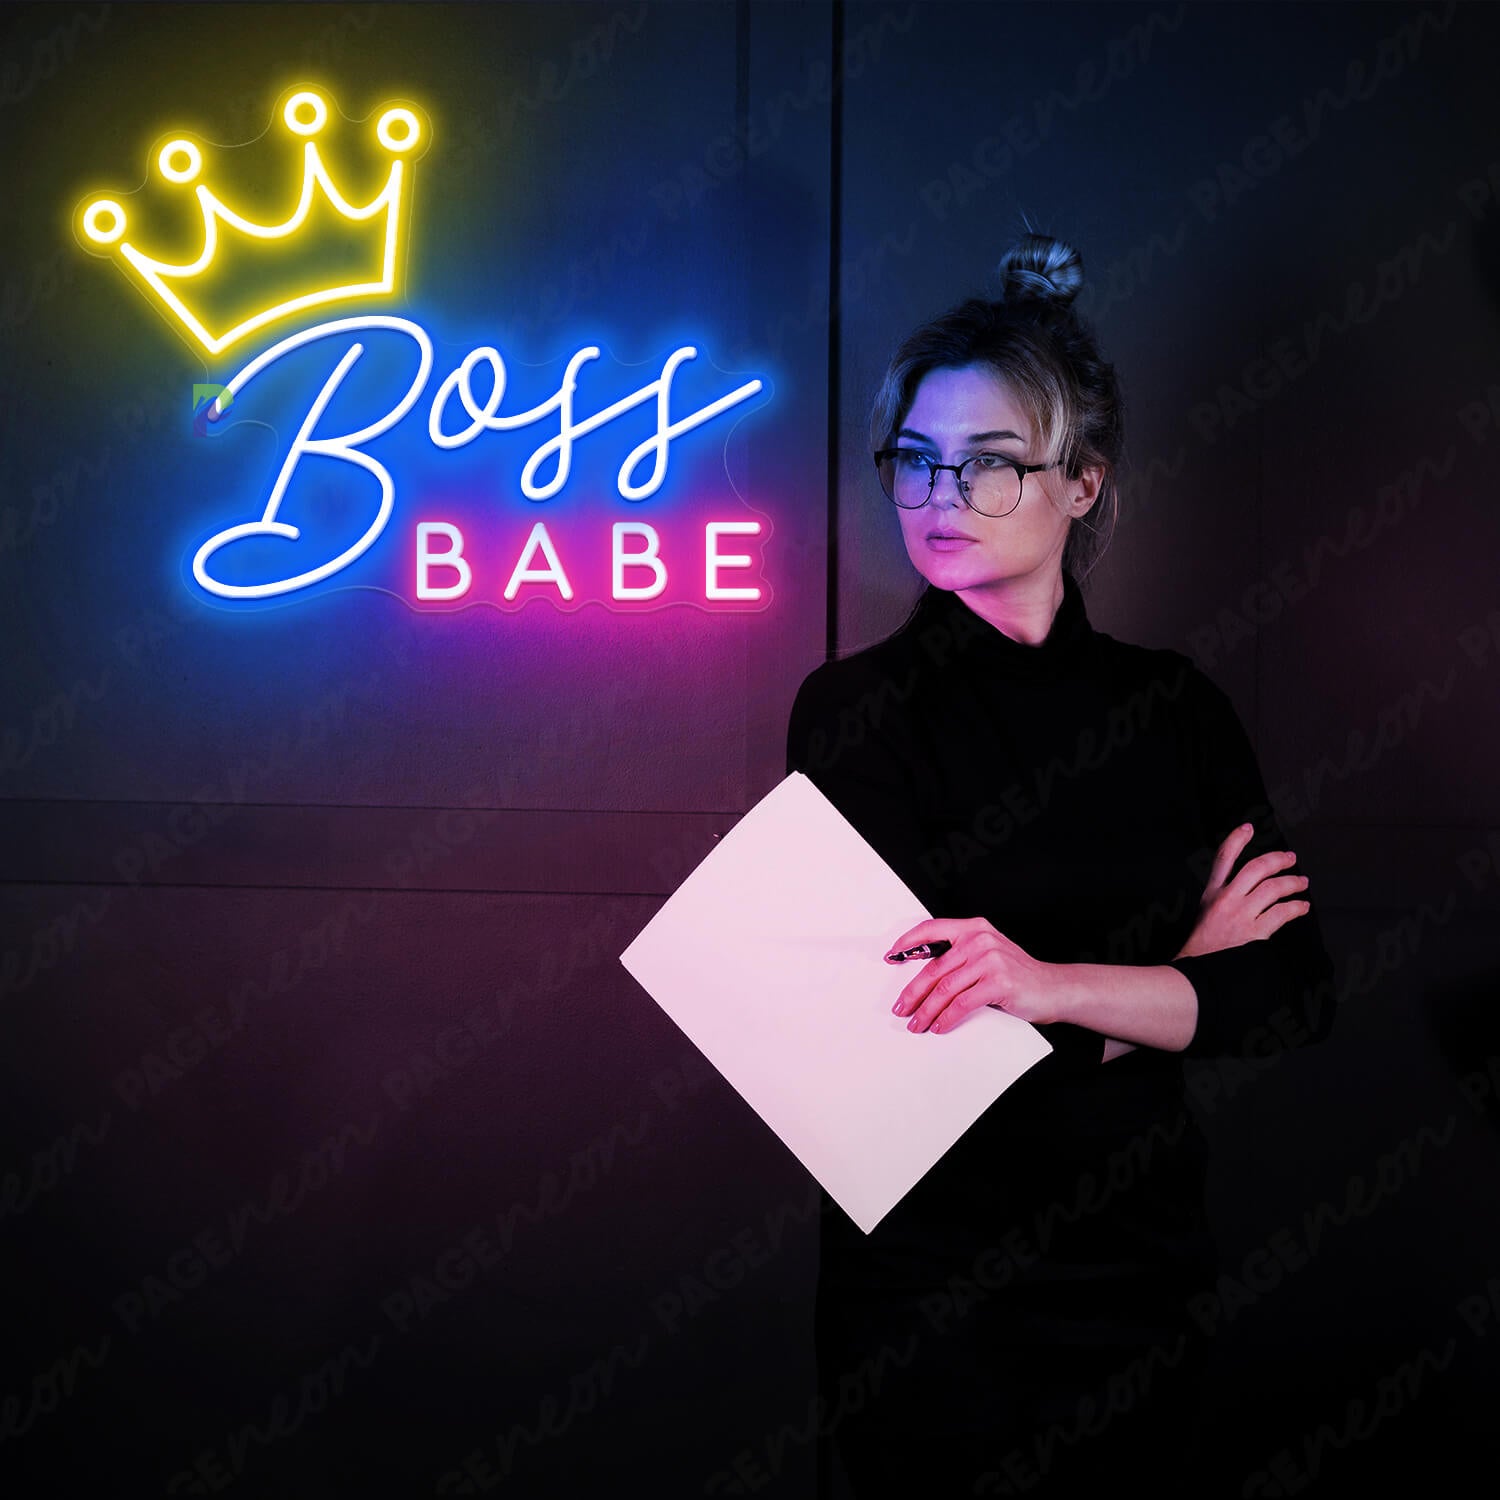 Boss Babe Neon Sign Babe Cave LED Light Sign Blue